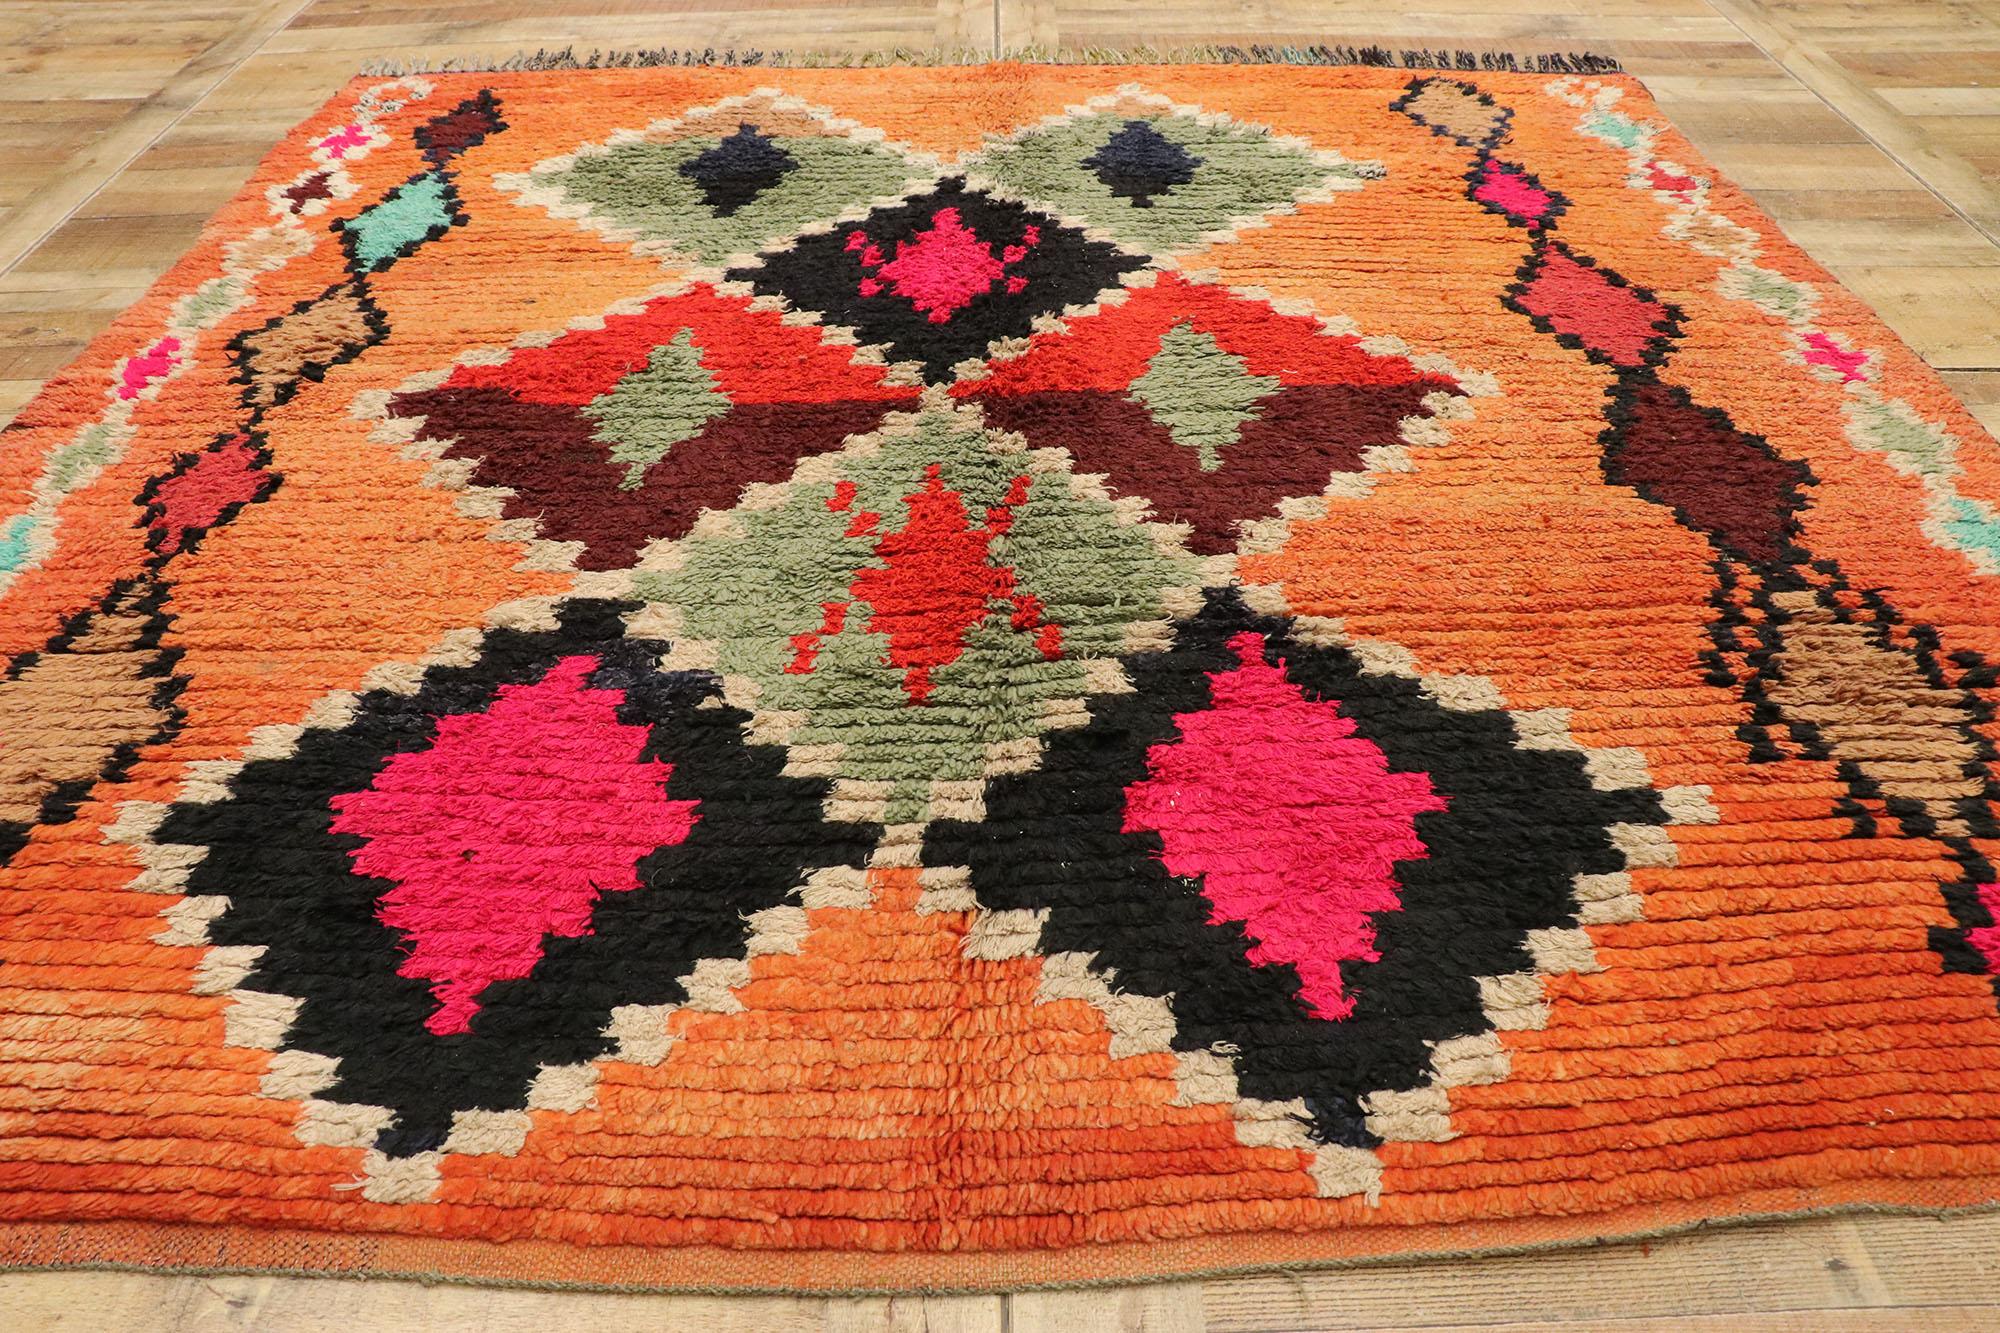 20227 Vintage Orange Boujad Moroccan Rug, 06'02 x 06'06. Immerse yourself in the vibrant soul of Boujad rugs, originating from the bustling streets of Boujad in the Khouribga region. Woven with expert skill by Berber tribes, particularly the Haouz